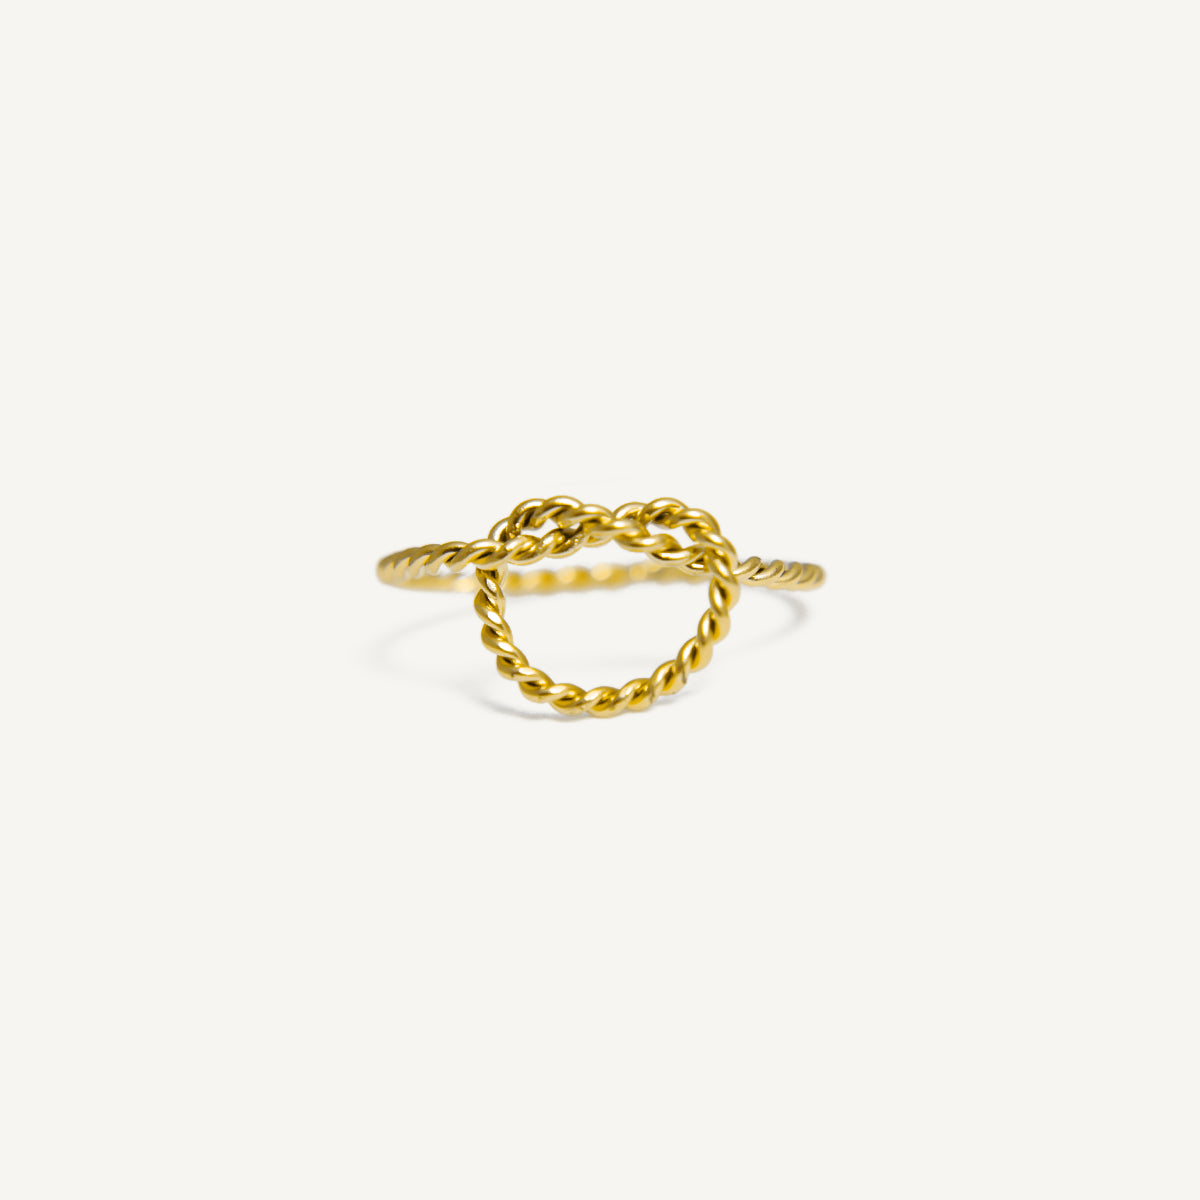 The Brenna Knot Ring